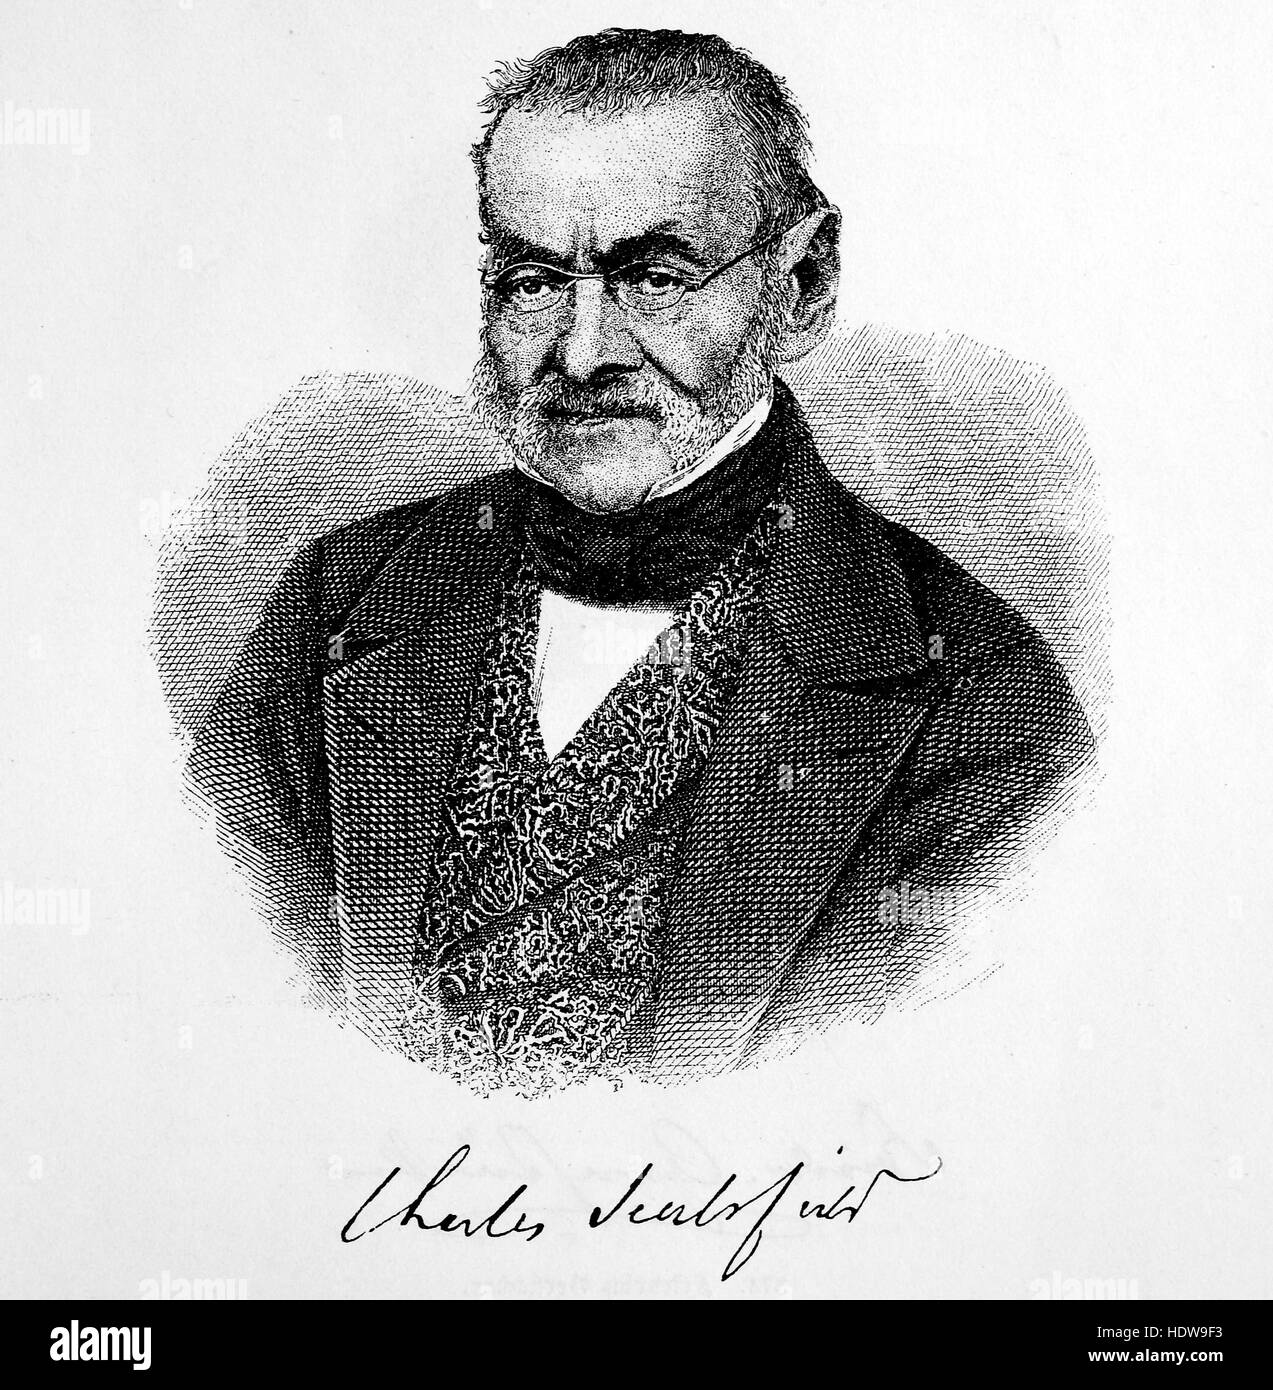 Charles Sealsfield was the pseudonym of Austrian-American journalist Carl or Karl Anton Postl, 17931864, an Austrian and American writer, woodcut from the year 1880 Stock Photo